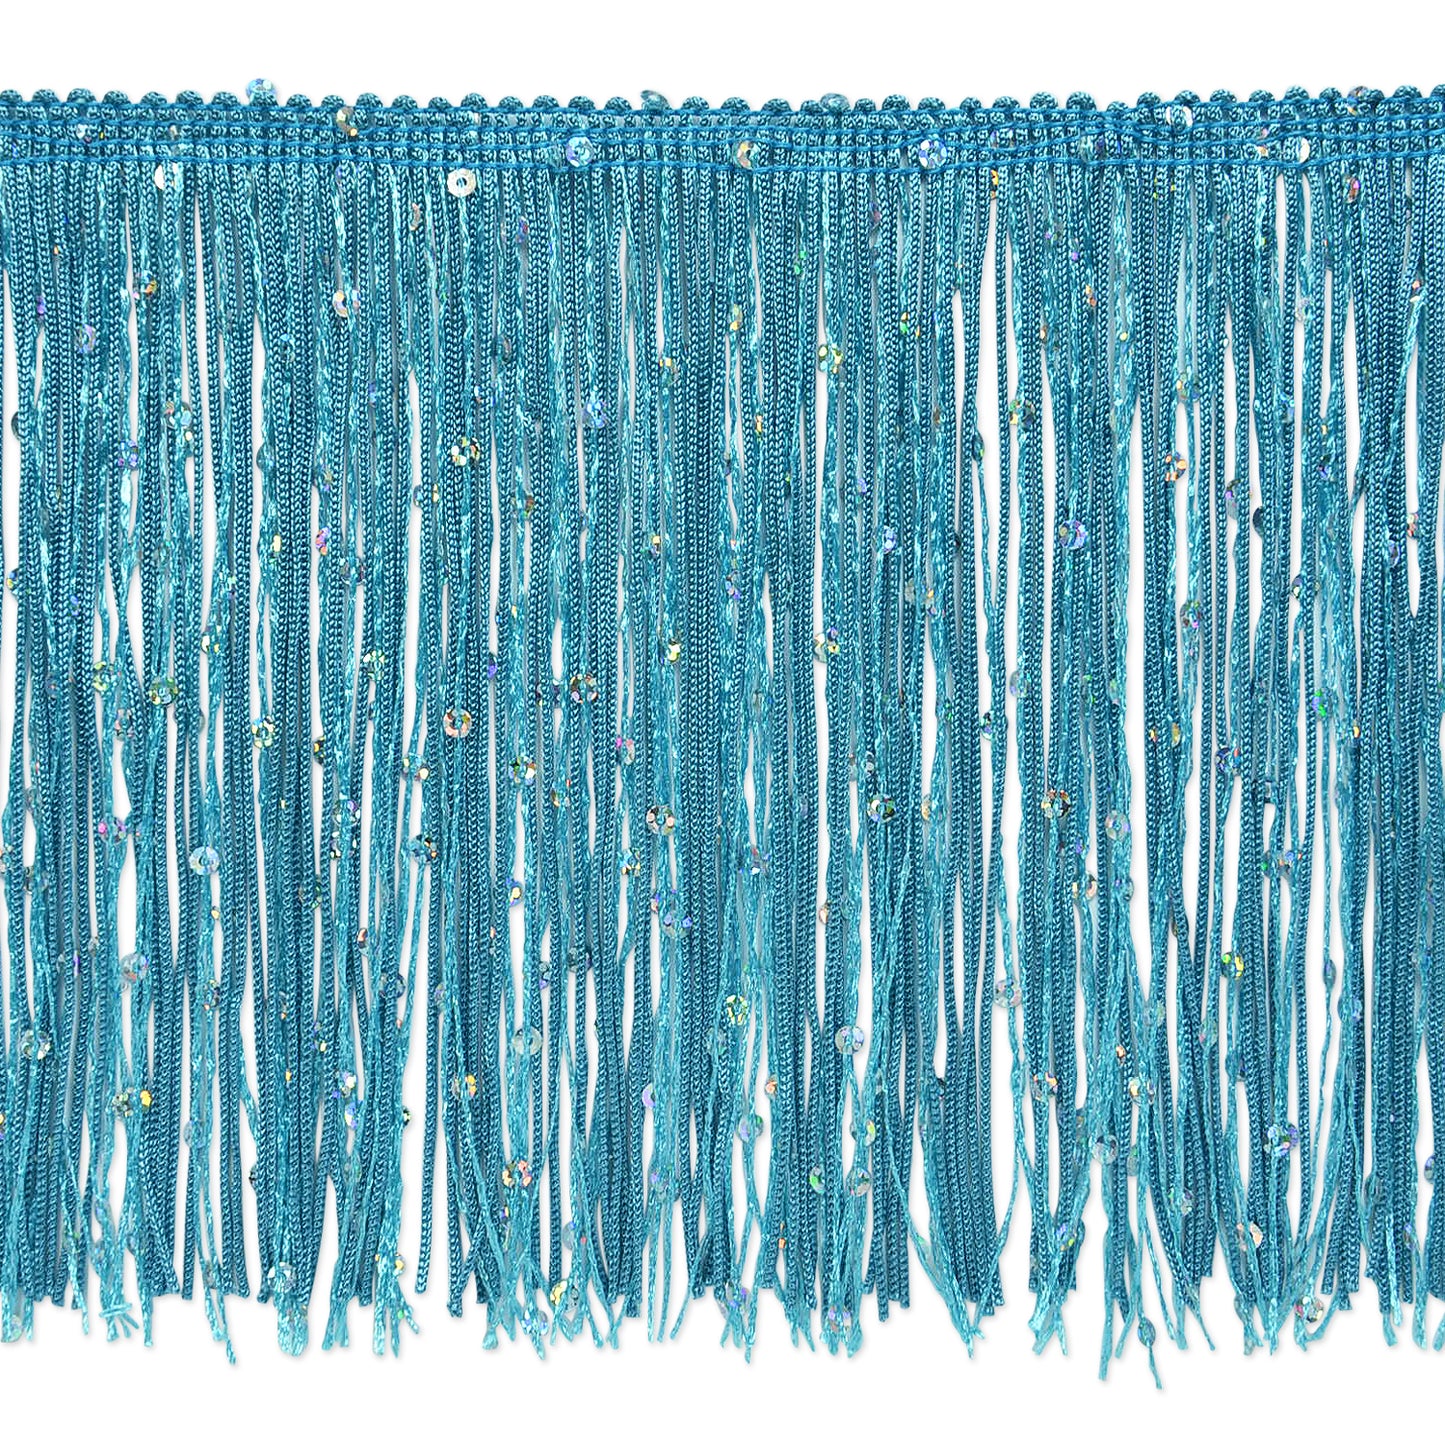 6" Starlight Hologram Sequin Chainette Fringe Trim (Sold by the Yard)